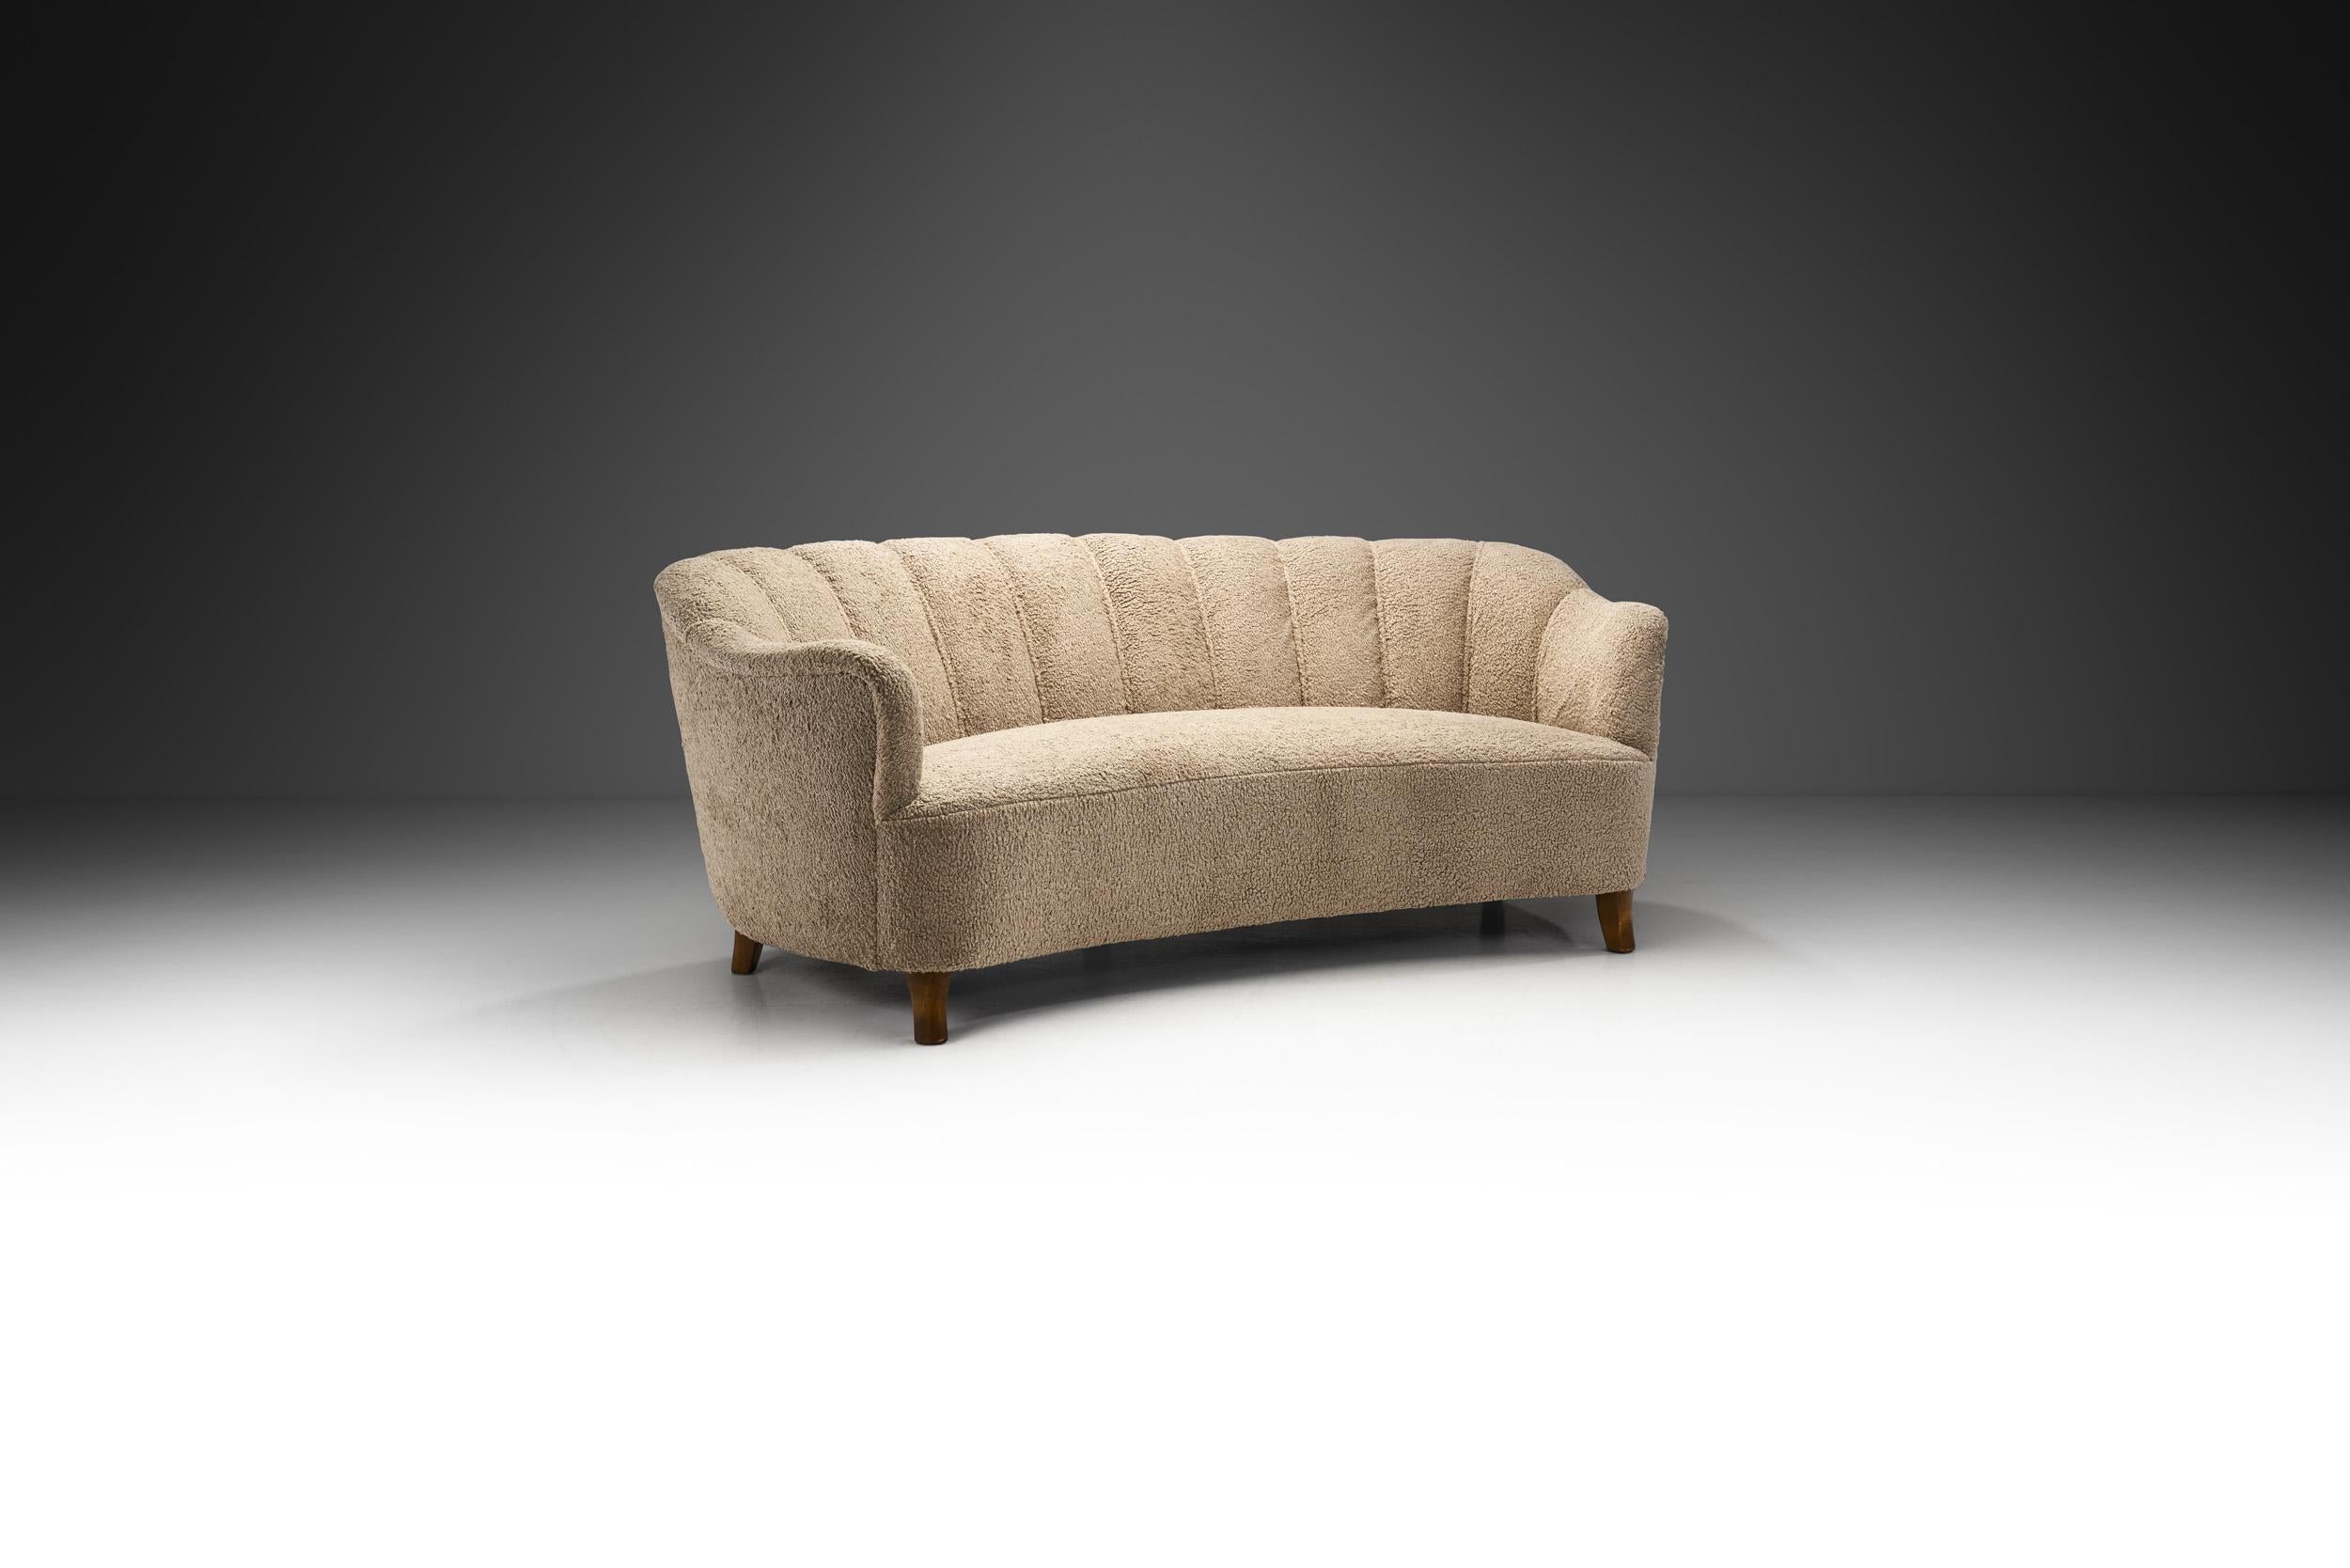 This beautiful Swedish three-seater sofa recalls the distinctive curves of the Art Deco period, while material and cabinetmaking-wise being a true Swedish Modern design. Thanks to its curved shape, this sofa is exceptionally cosy and elegant, a